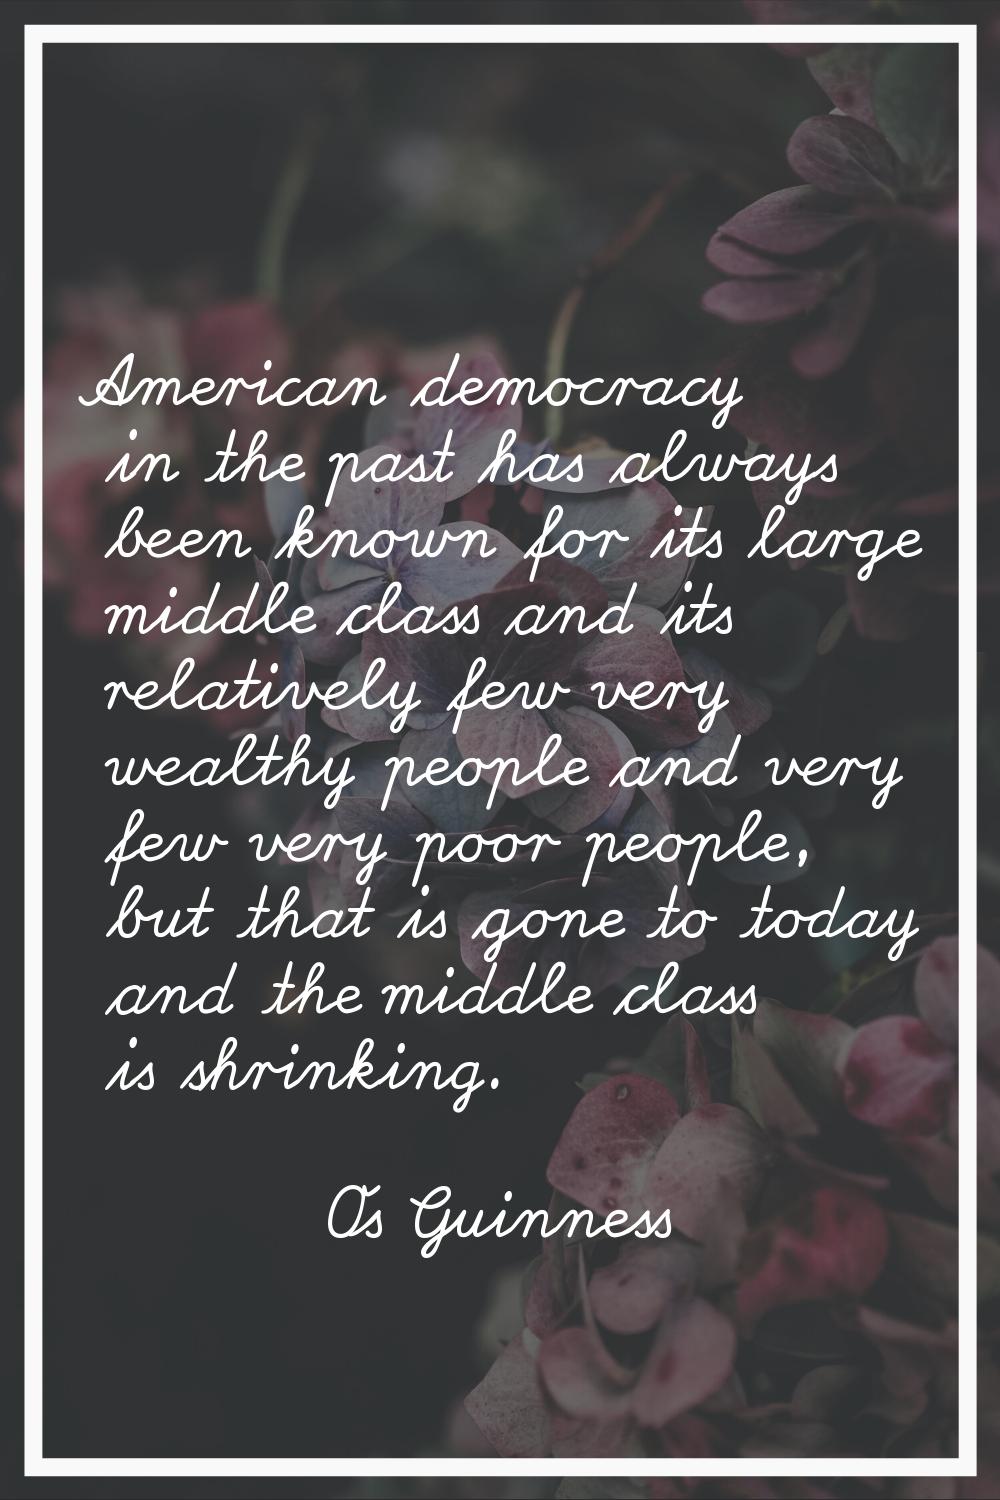 American democracy in the past has always been known for its large middle class and its relatively 